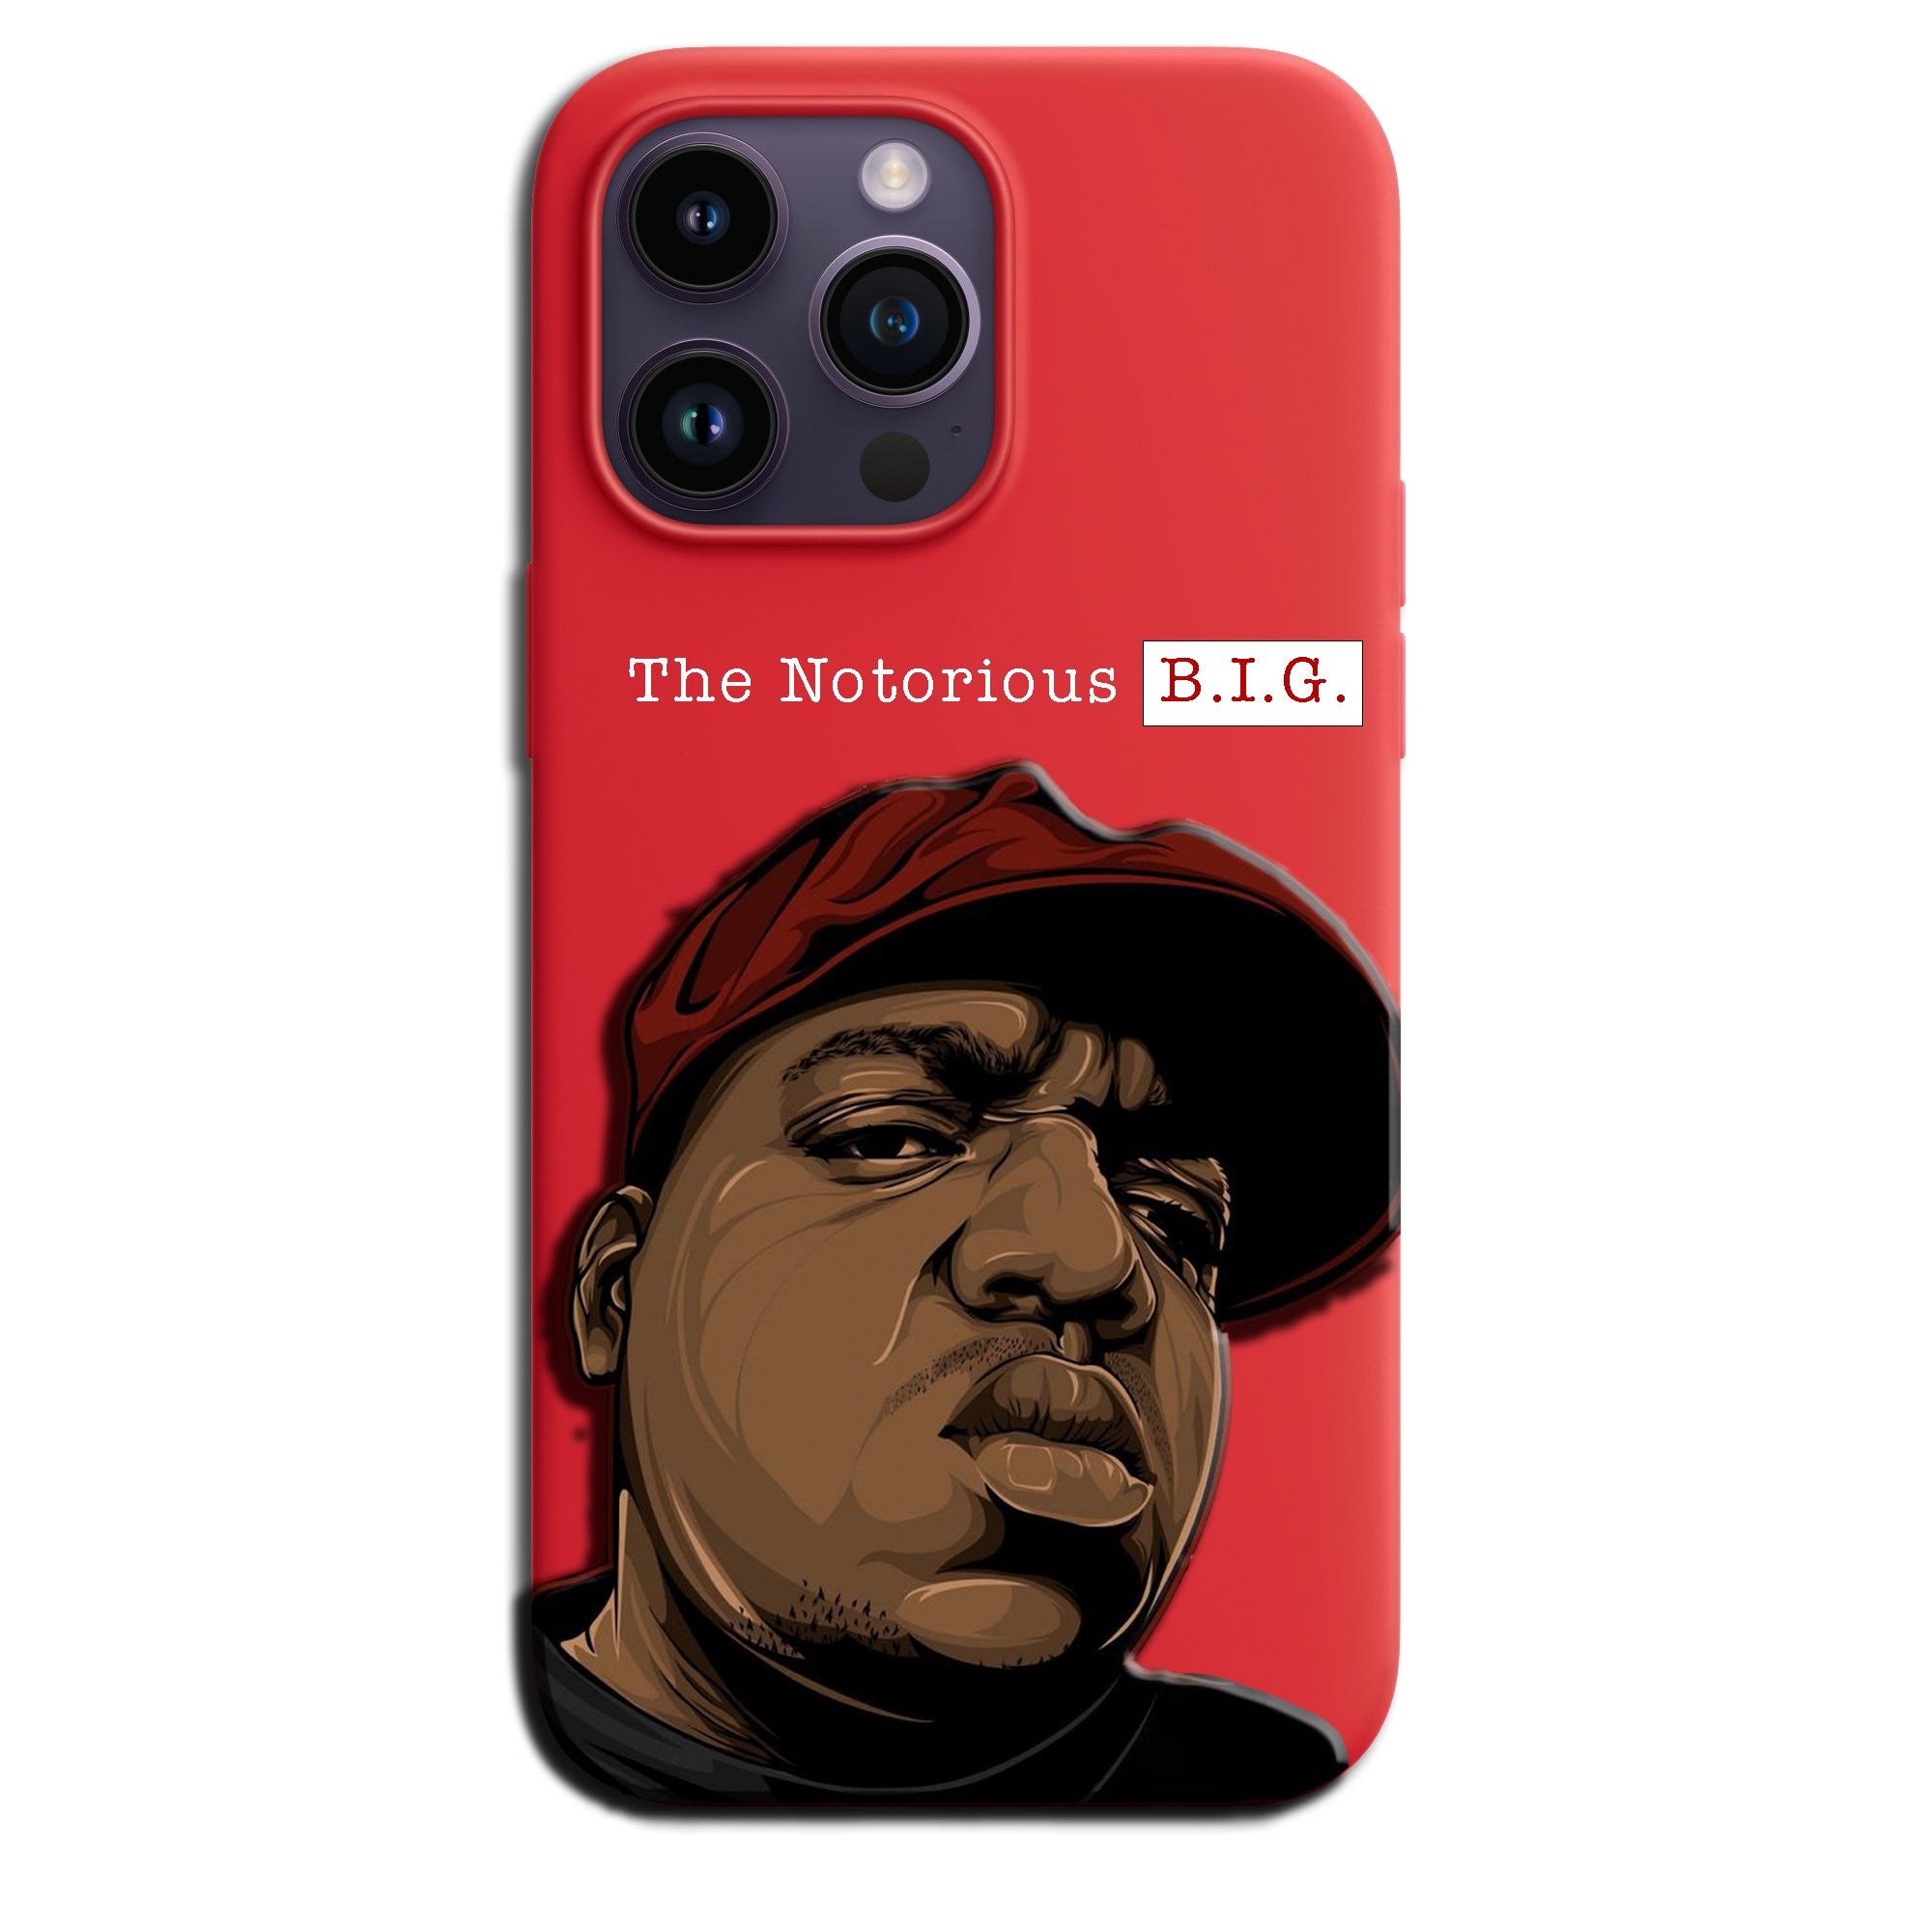 The Notorious B.I.G. - Cover Monotone